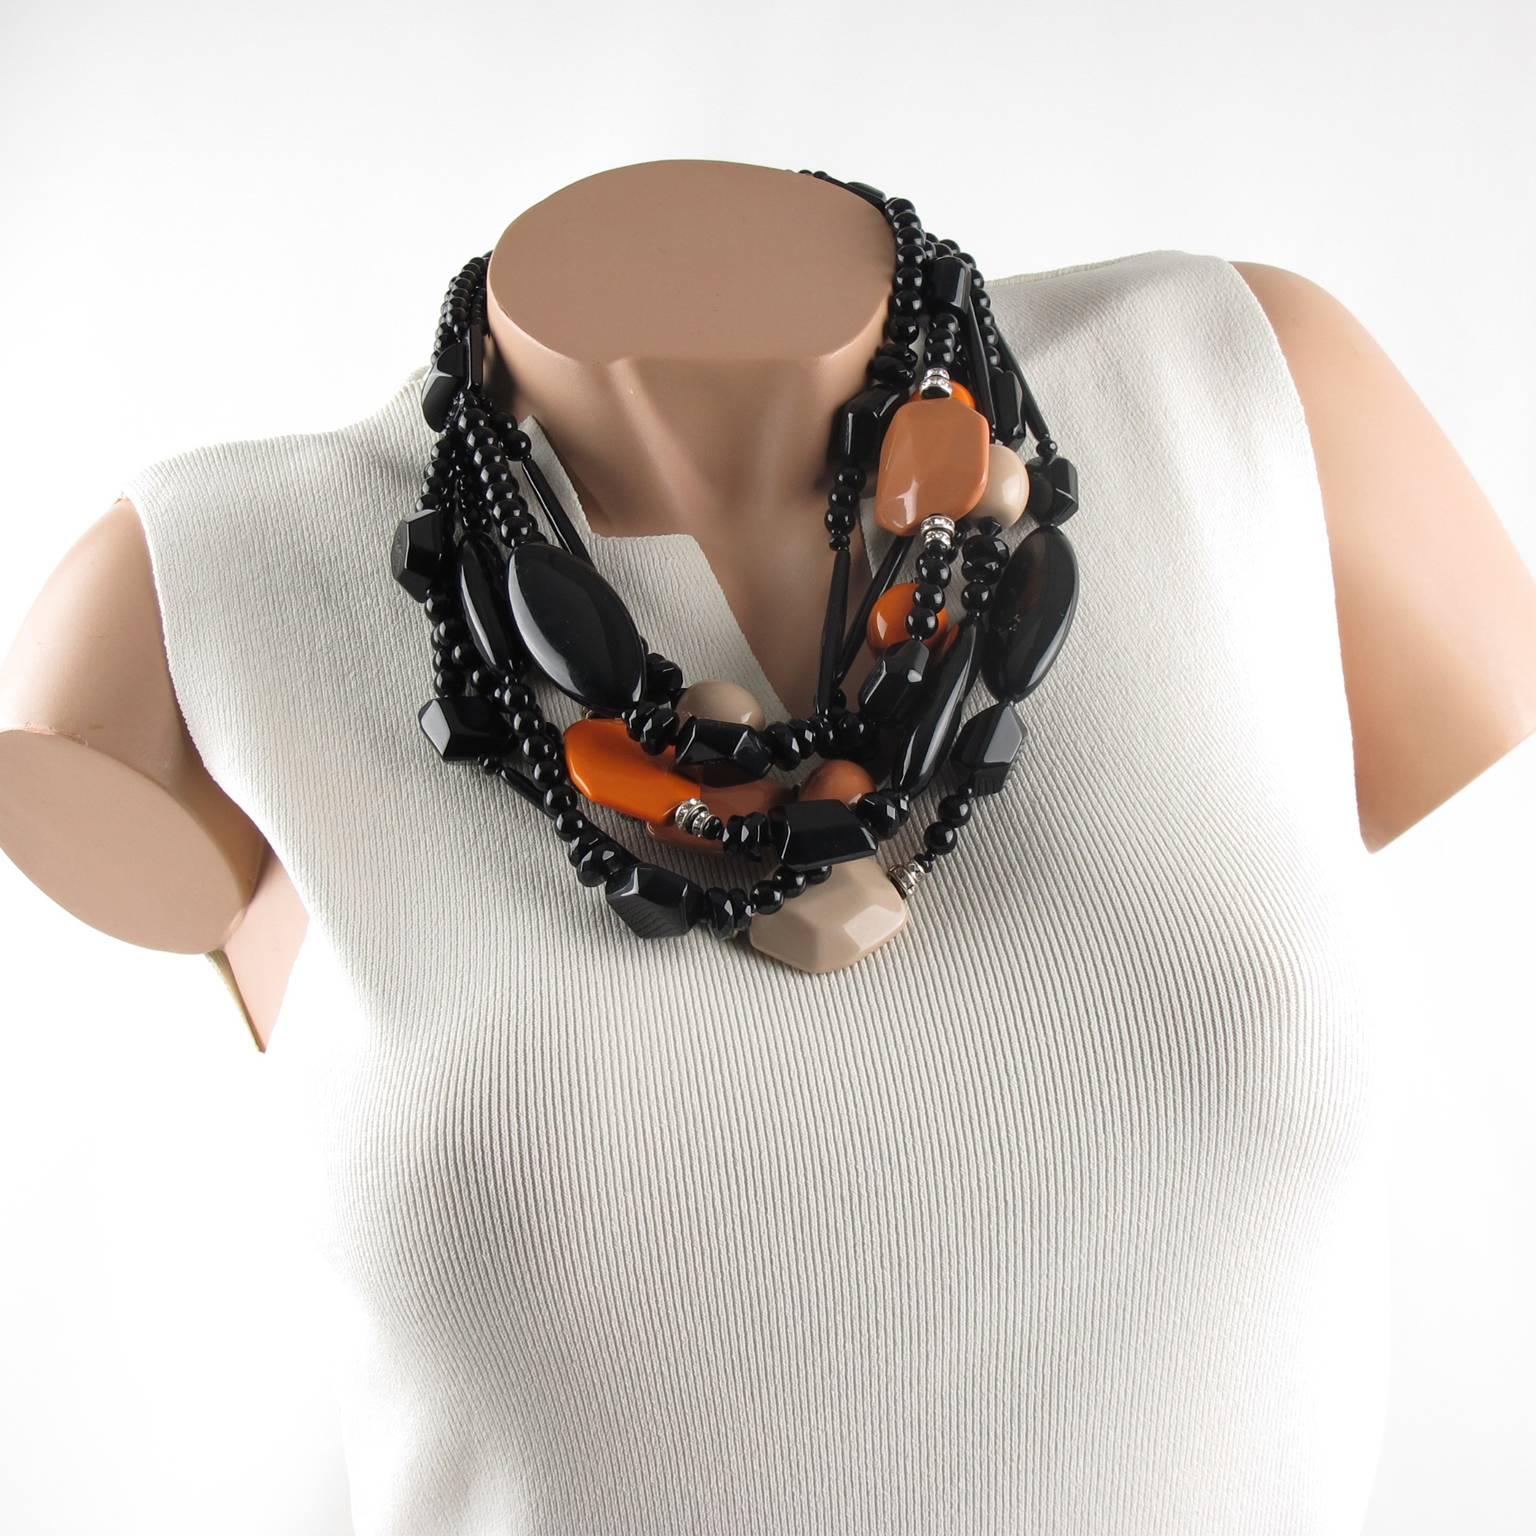 Superb Angela Caputi, made in Italy resin choker beaded necklace. Oversized fruit salad multi-strand design with dominant black color contrasted with carrot orange, beige hazel wood and apple cider resin pebbles beads, compliment with clear